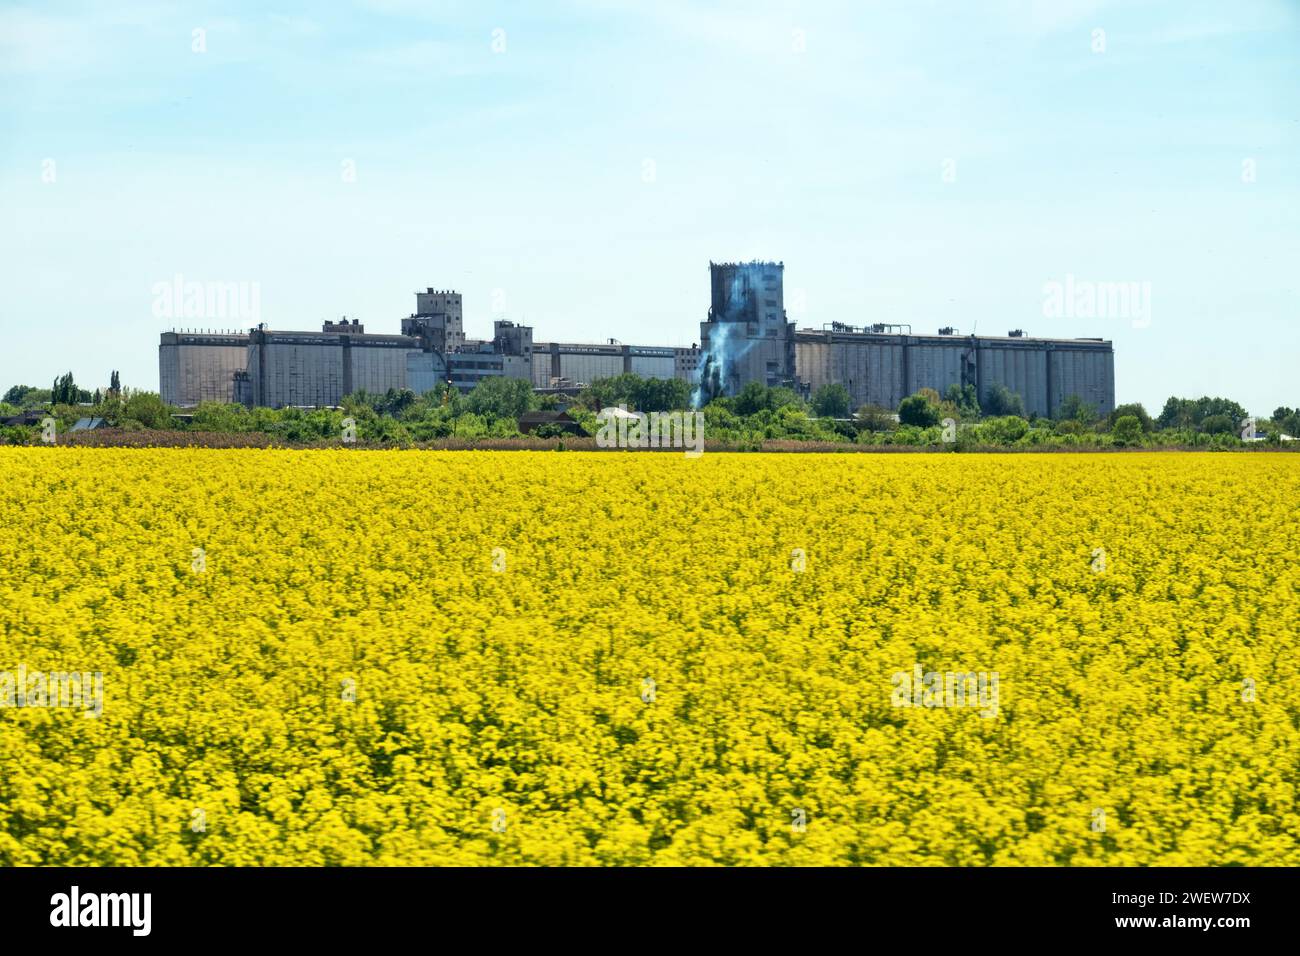 Yellow fields of rapeseed colza (Brassica napus var. oleifera), canola flowers on southern plains, former steppe. Grain elevator in the background Stock Photo